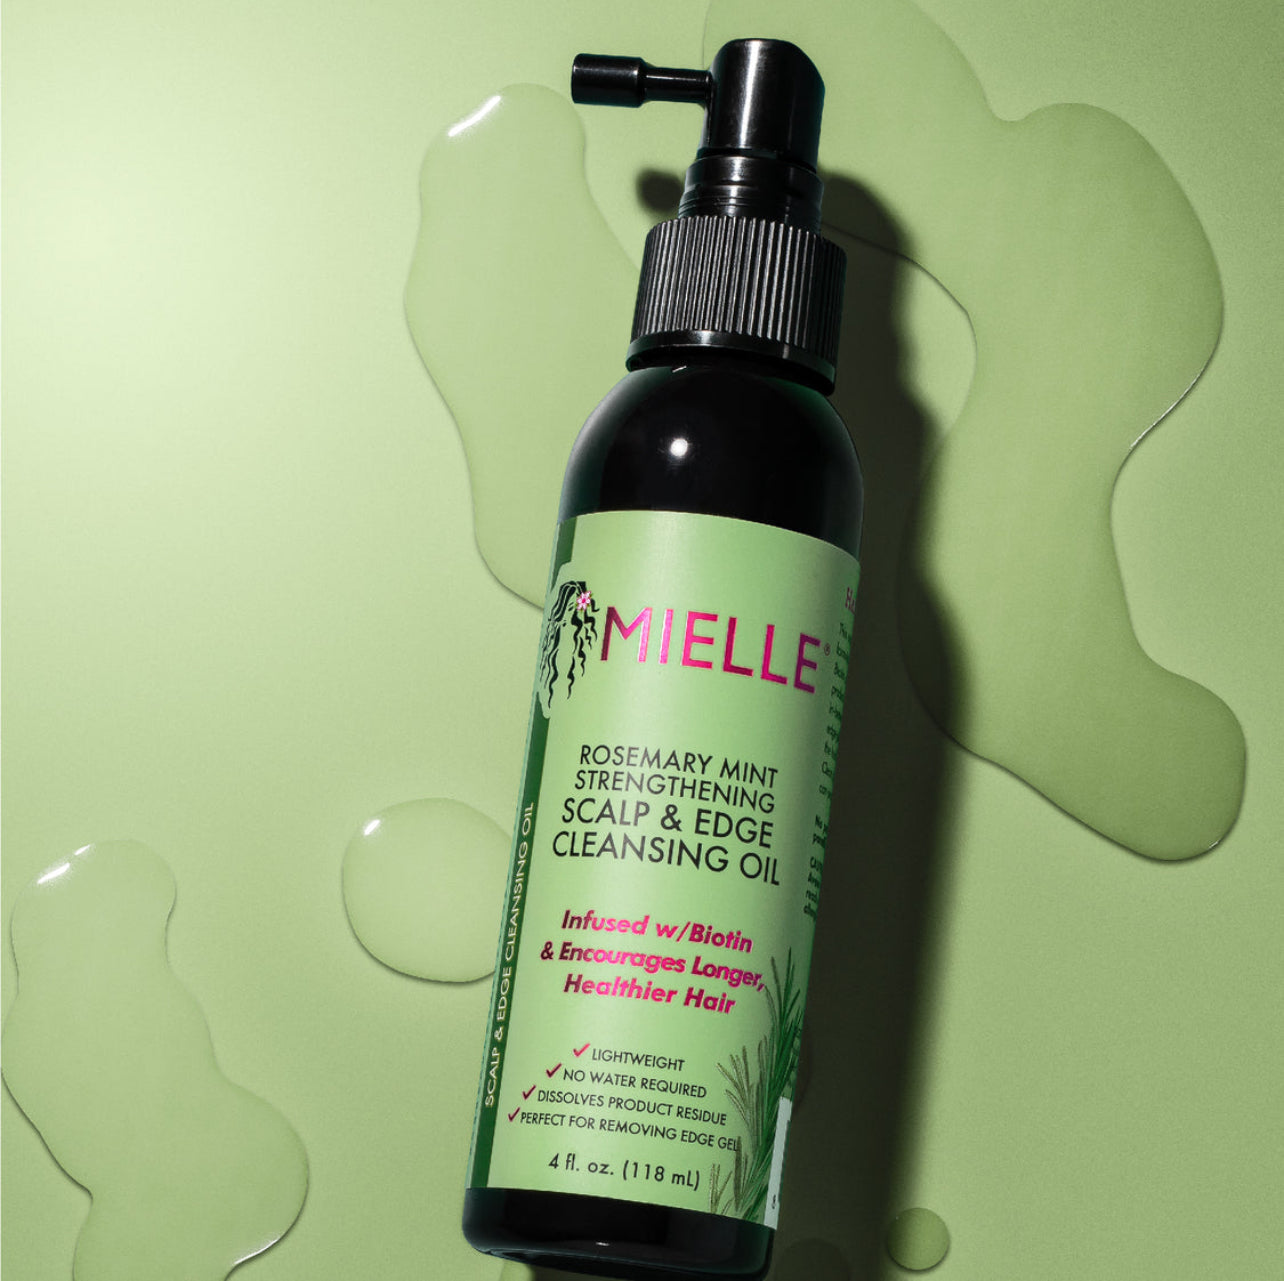 Mielle Rosemary Mint Scalp & Edge Cleansing Oil